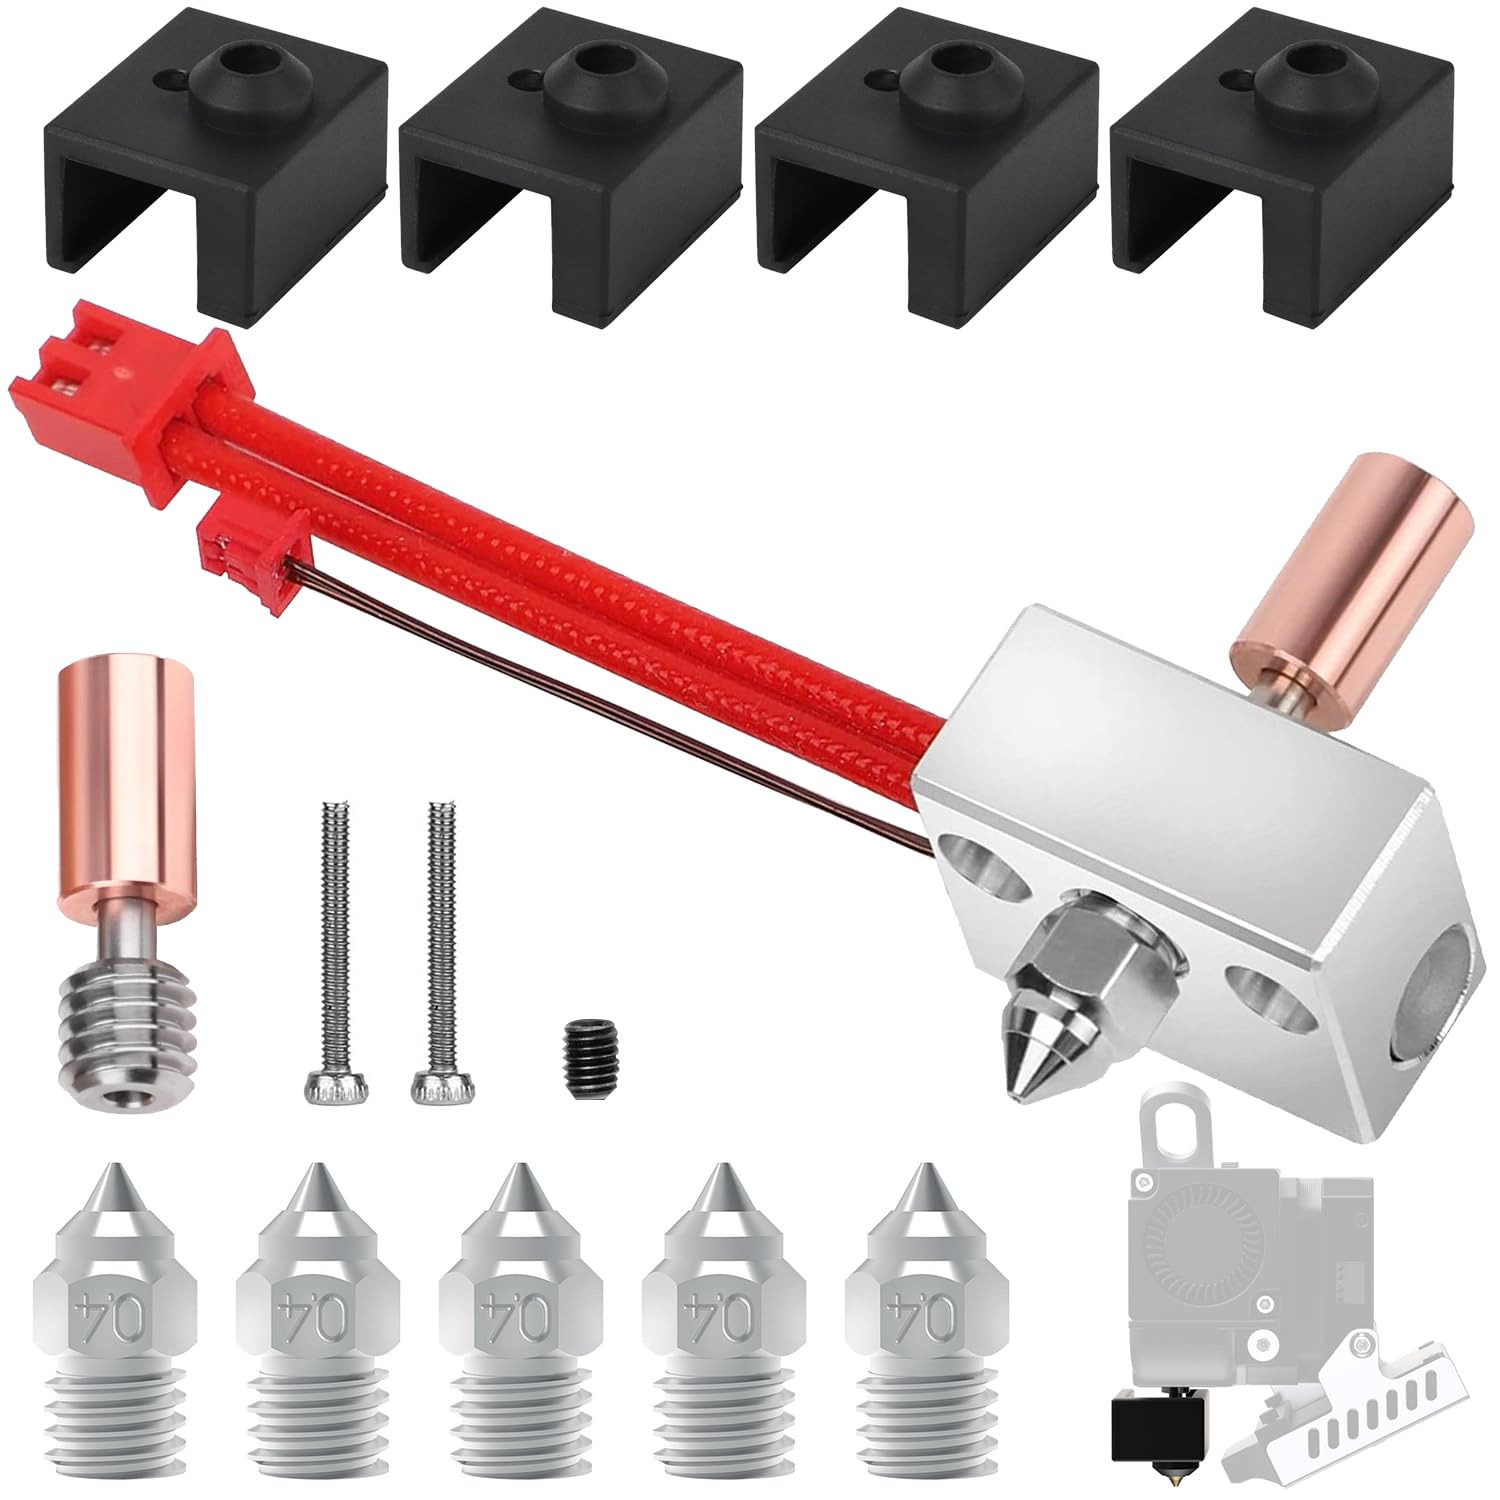 Sprite Extruder Upgrade Heater Block Kit for Creality Sprite Hotend with 5 Co...